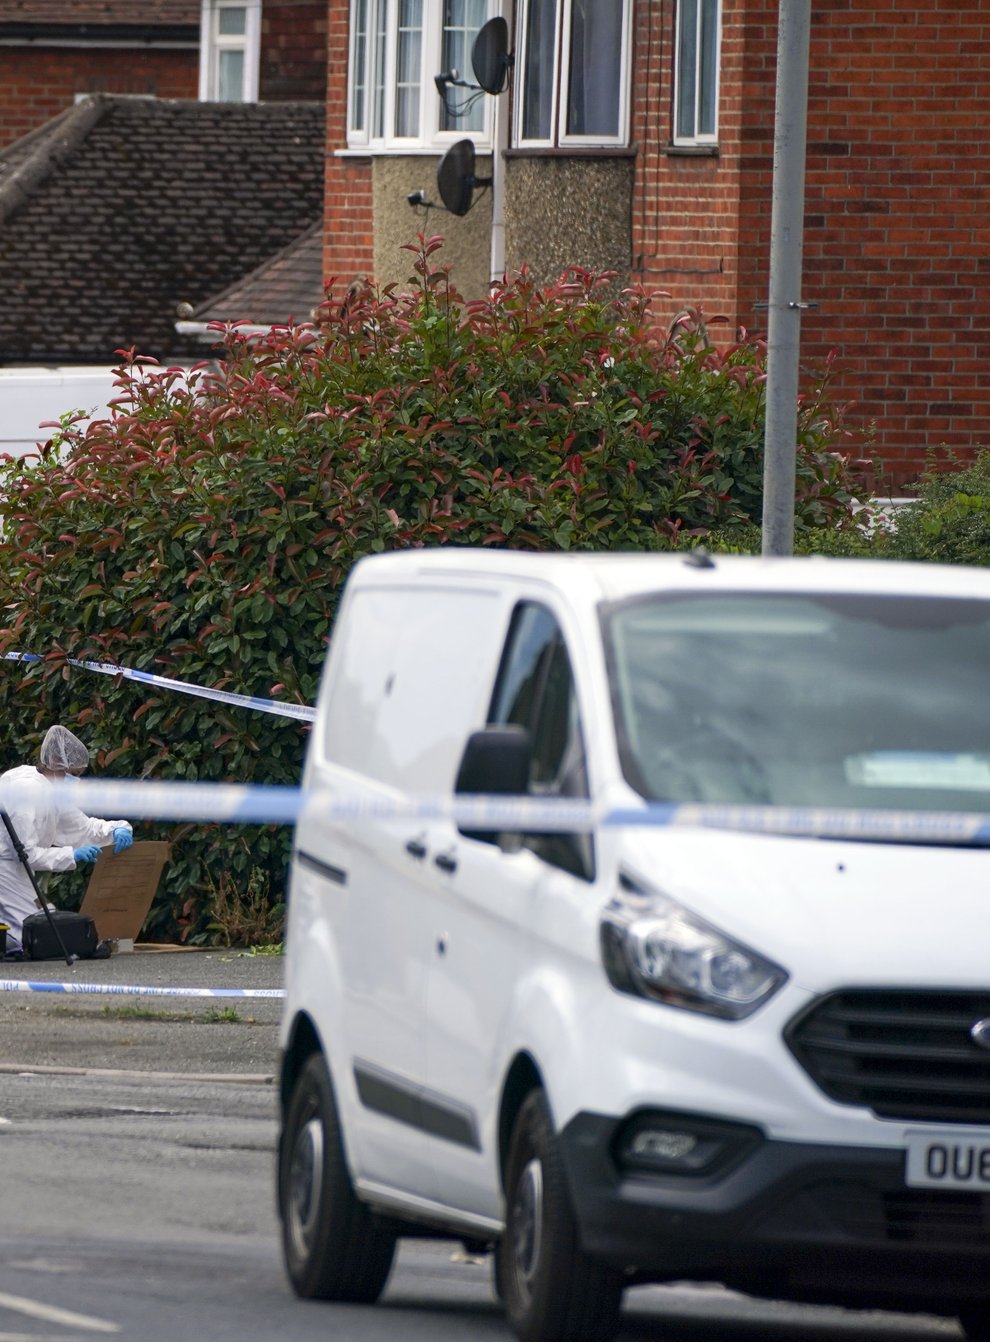 Police activity at the scene in Micklefield Road, High Wycombe (Steve PArsons/PA Wire)